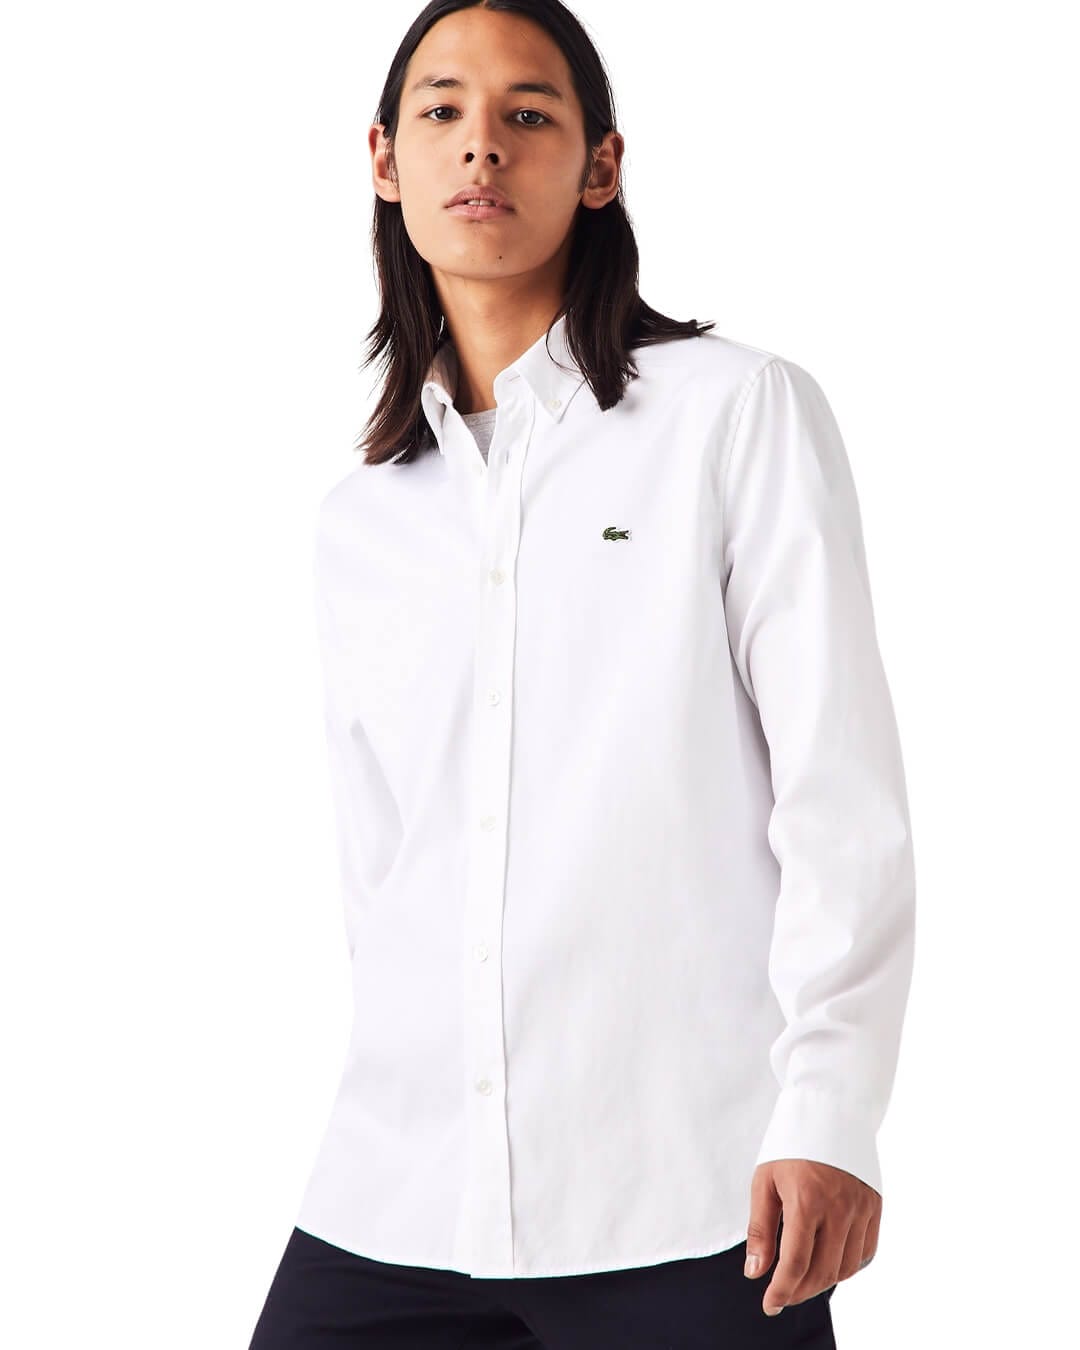 Lacoste Shirts Lacoste Long Sleeved White Woven Shirt